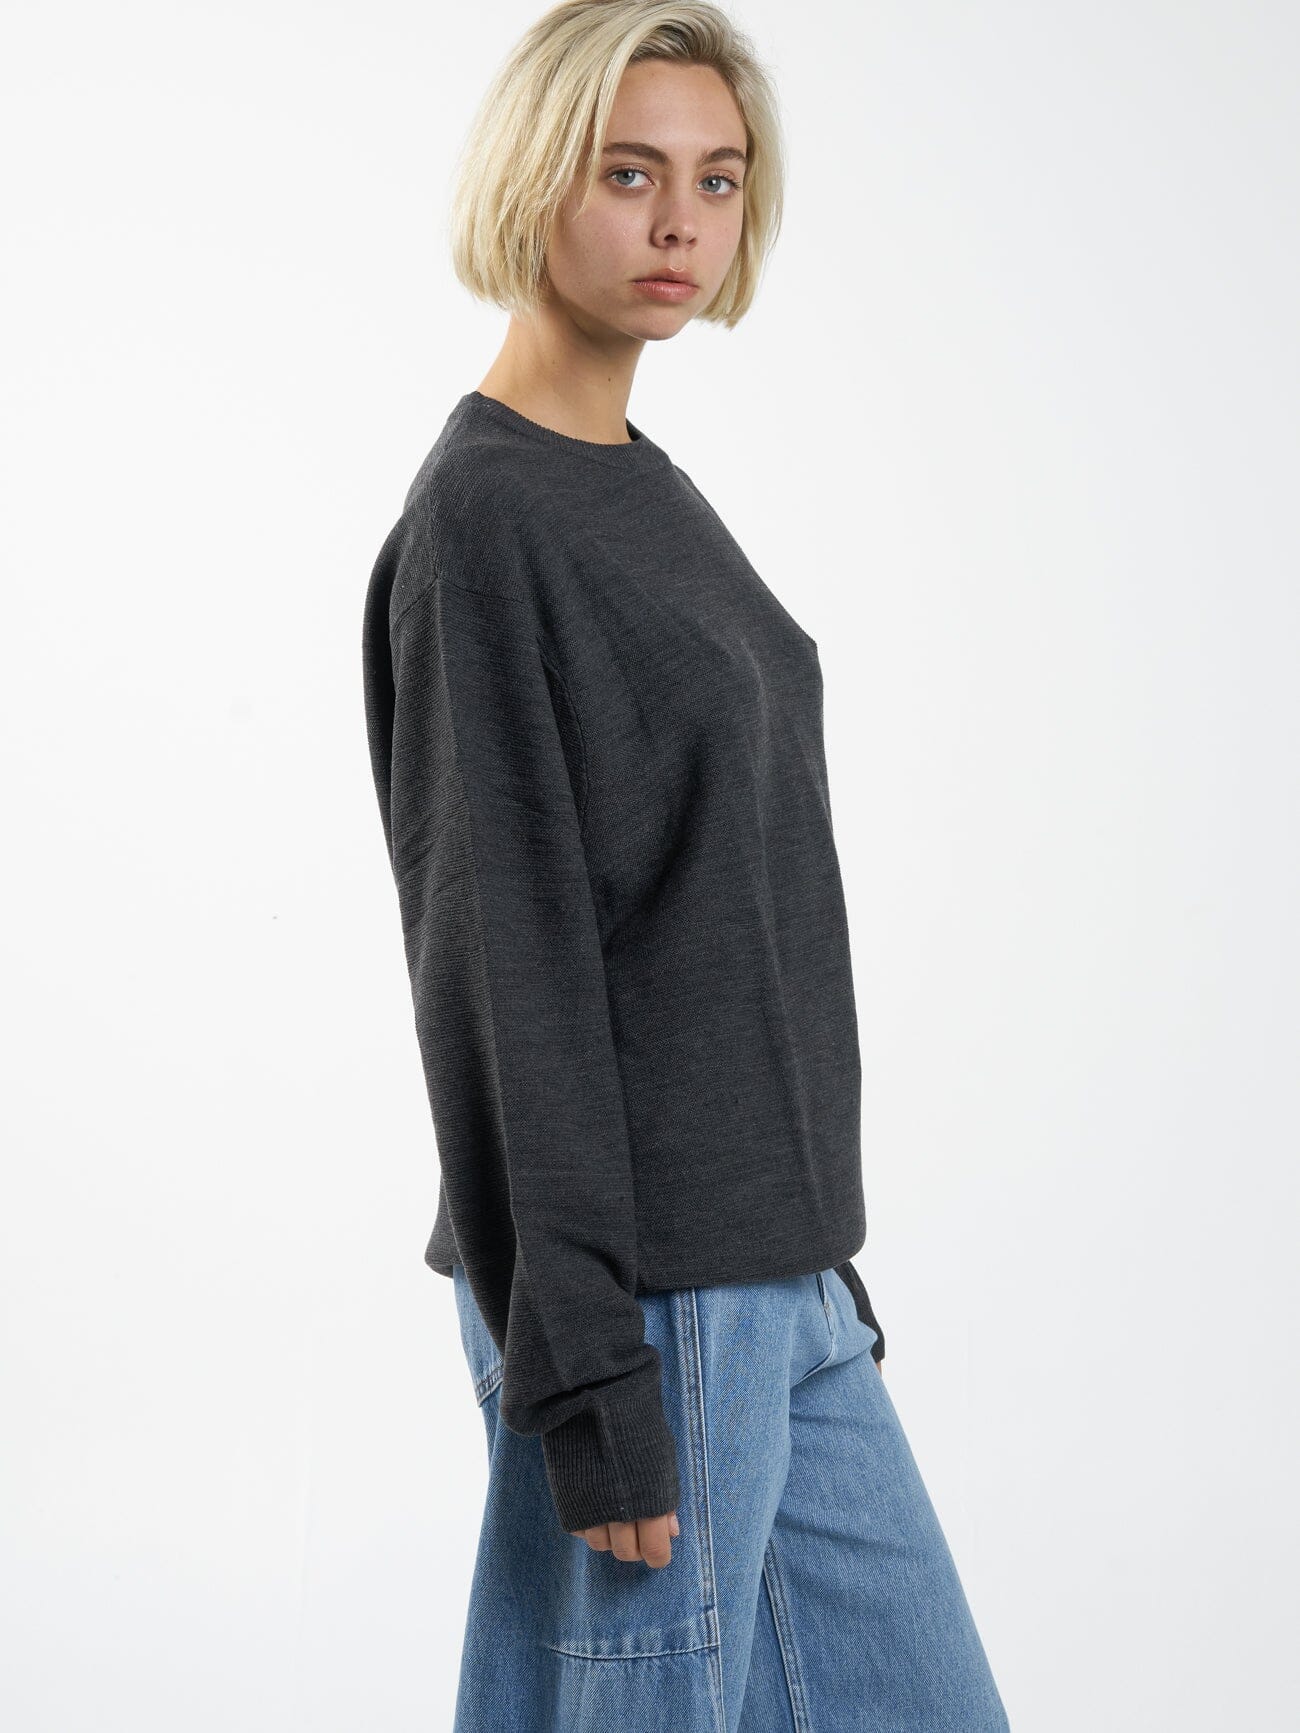 Ollie Knit Pullover - Charcoal